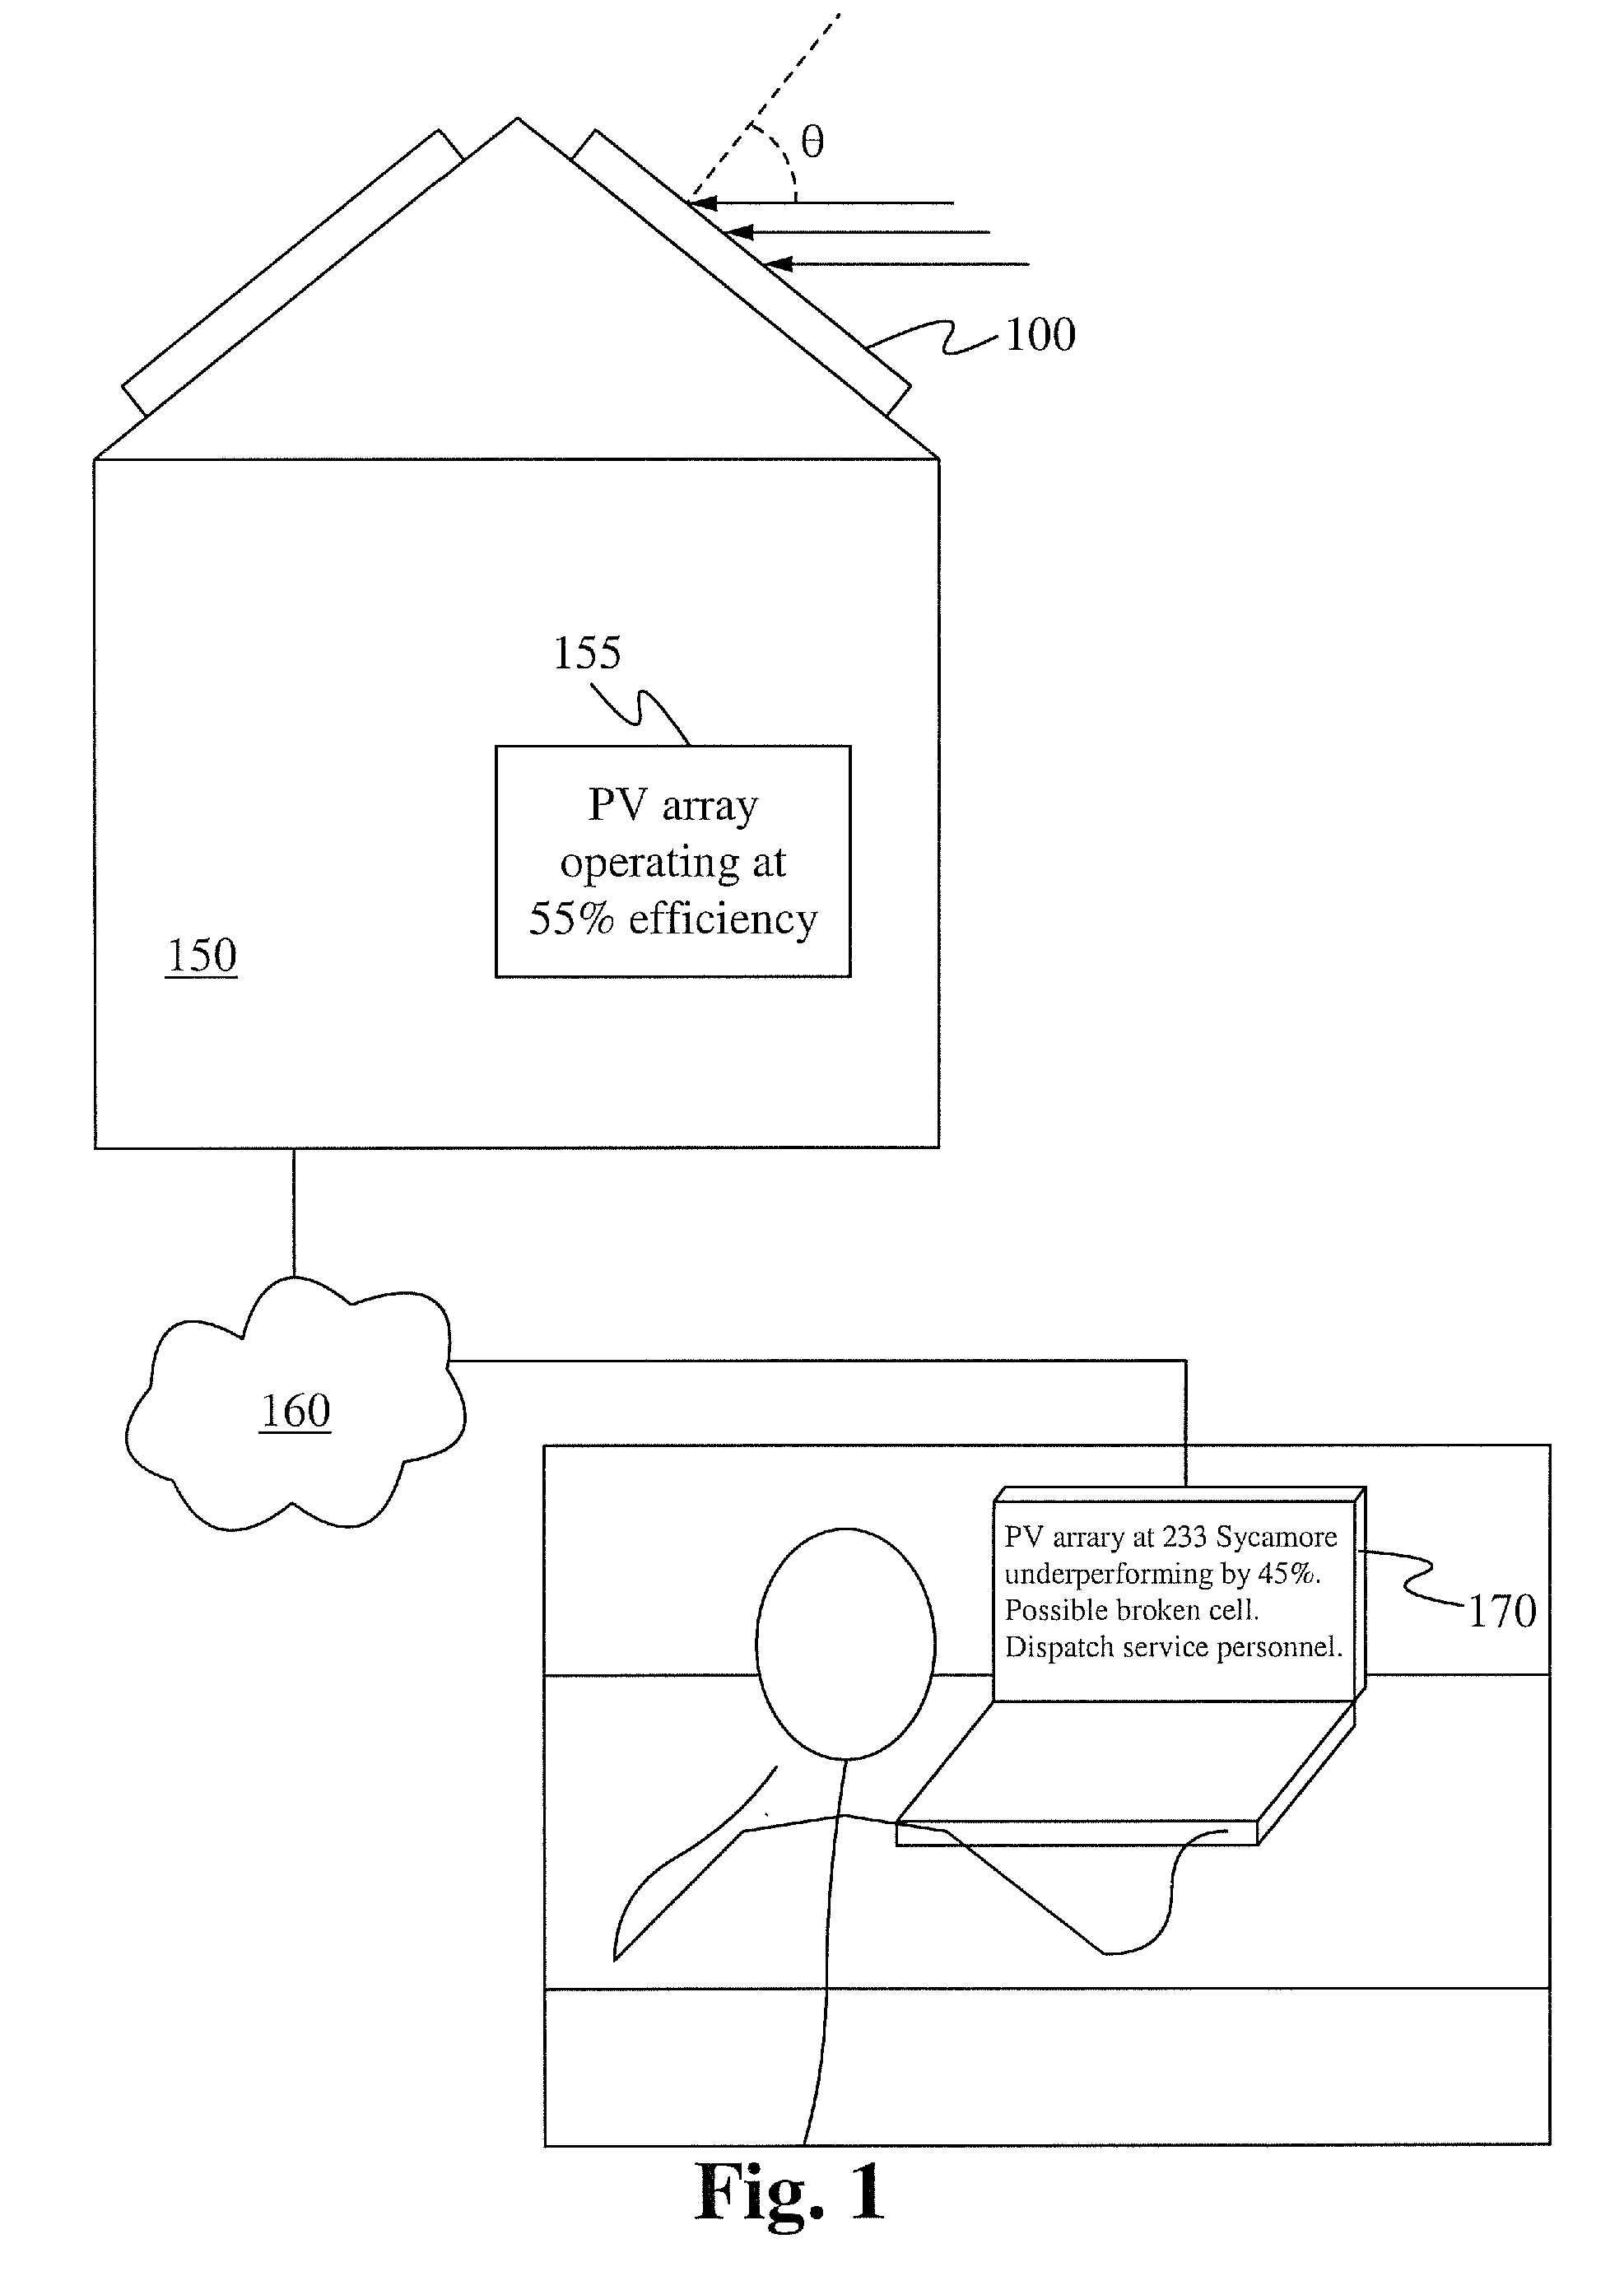 System for and method of monitoring and diagnosing the performance of photovoltaic or other renewable power plants